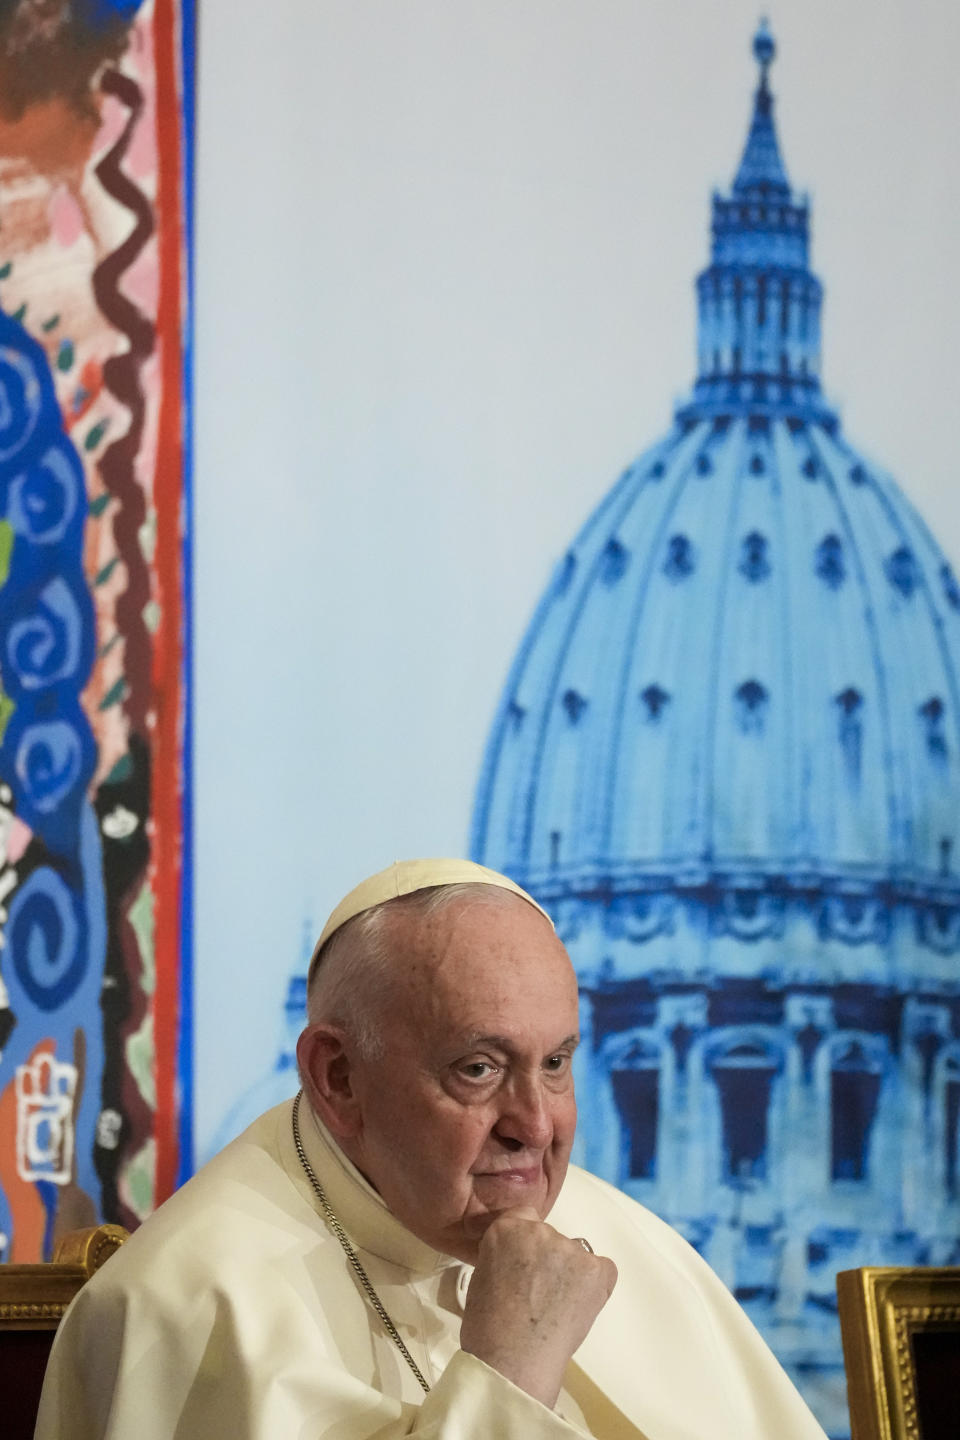 Pope Francis attends the world's first meeting of the 'Educational Eco-Cities' promoted by the 'Scholas Occurrentes', at the Vatican, Thursday, May 25, 2023. (AP Photo/Andrew Medichini)